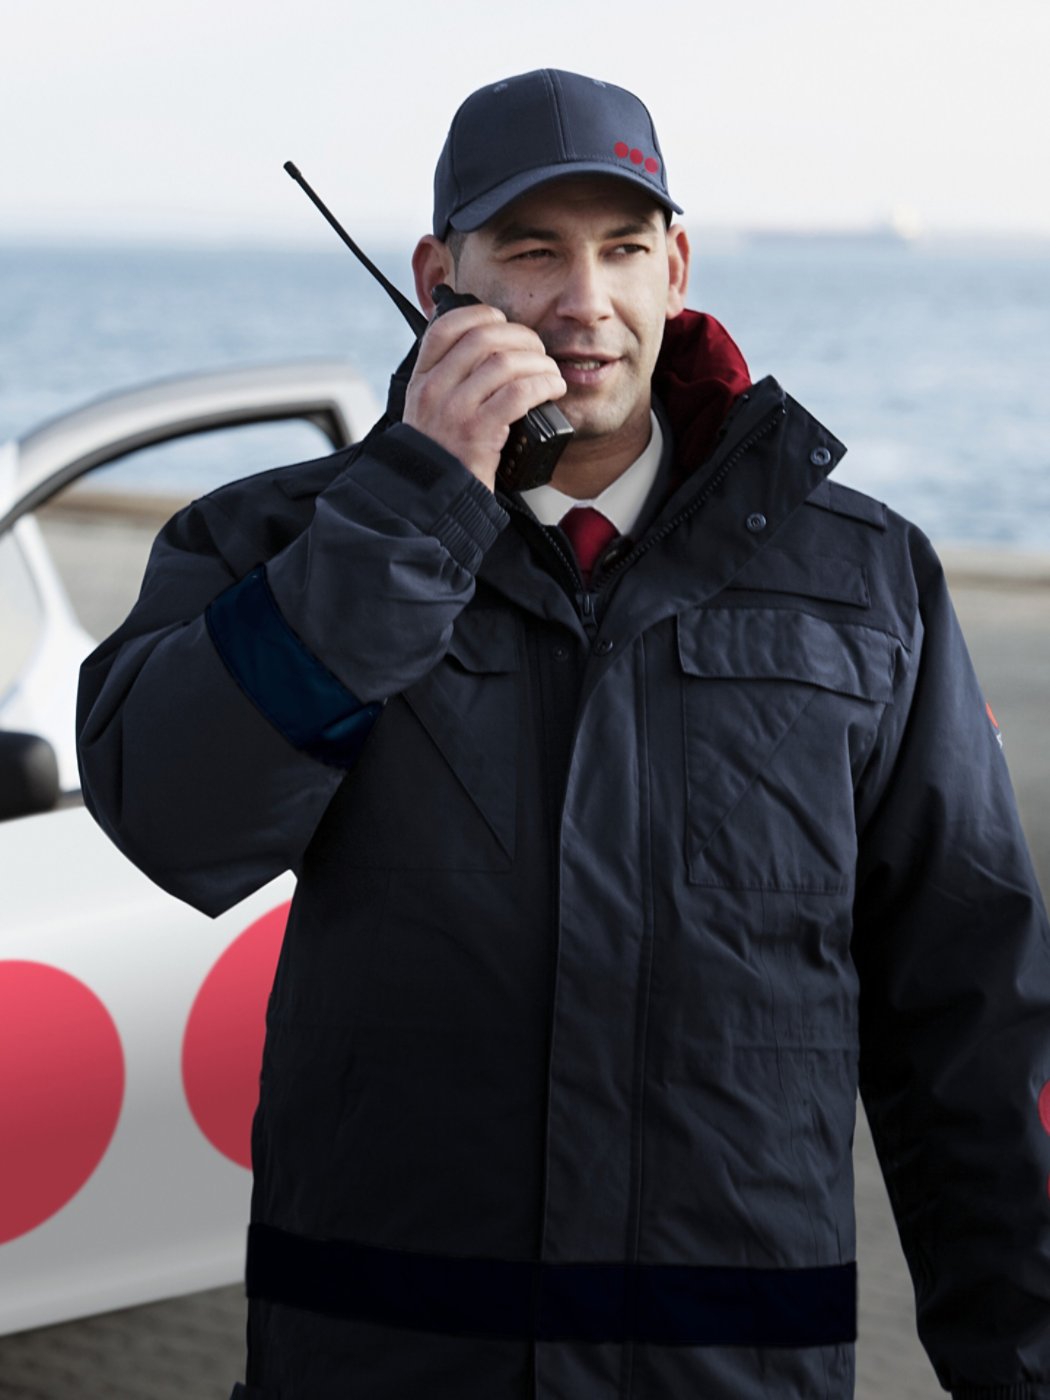 Security guard in harbor on phone